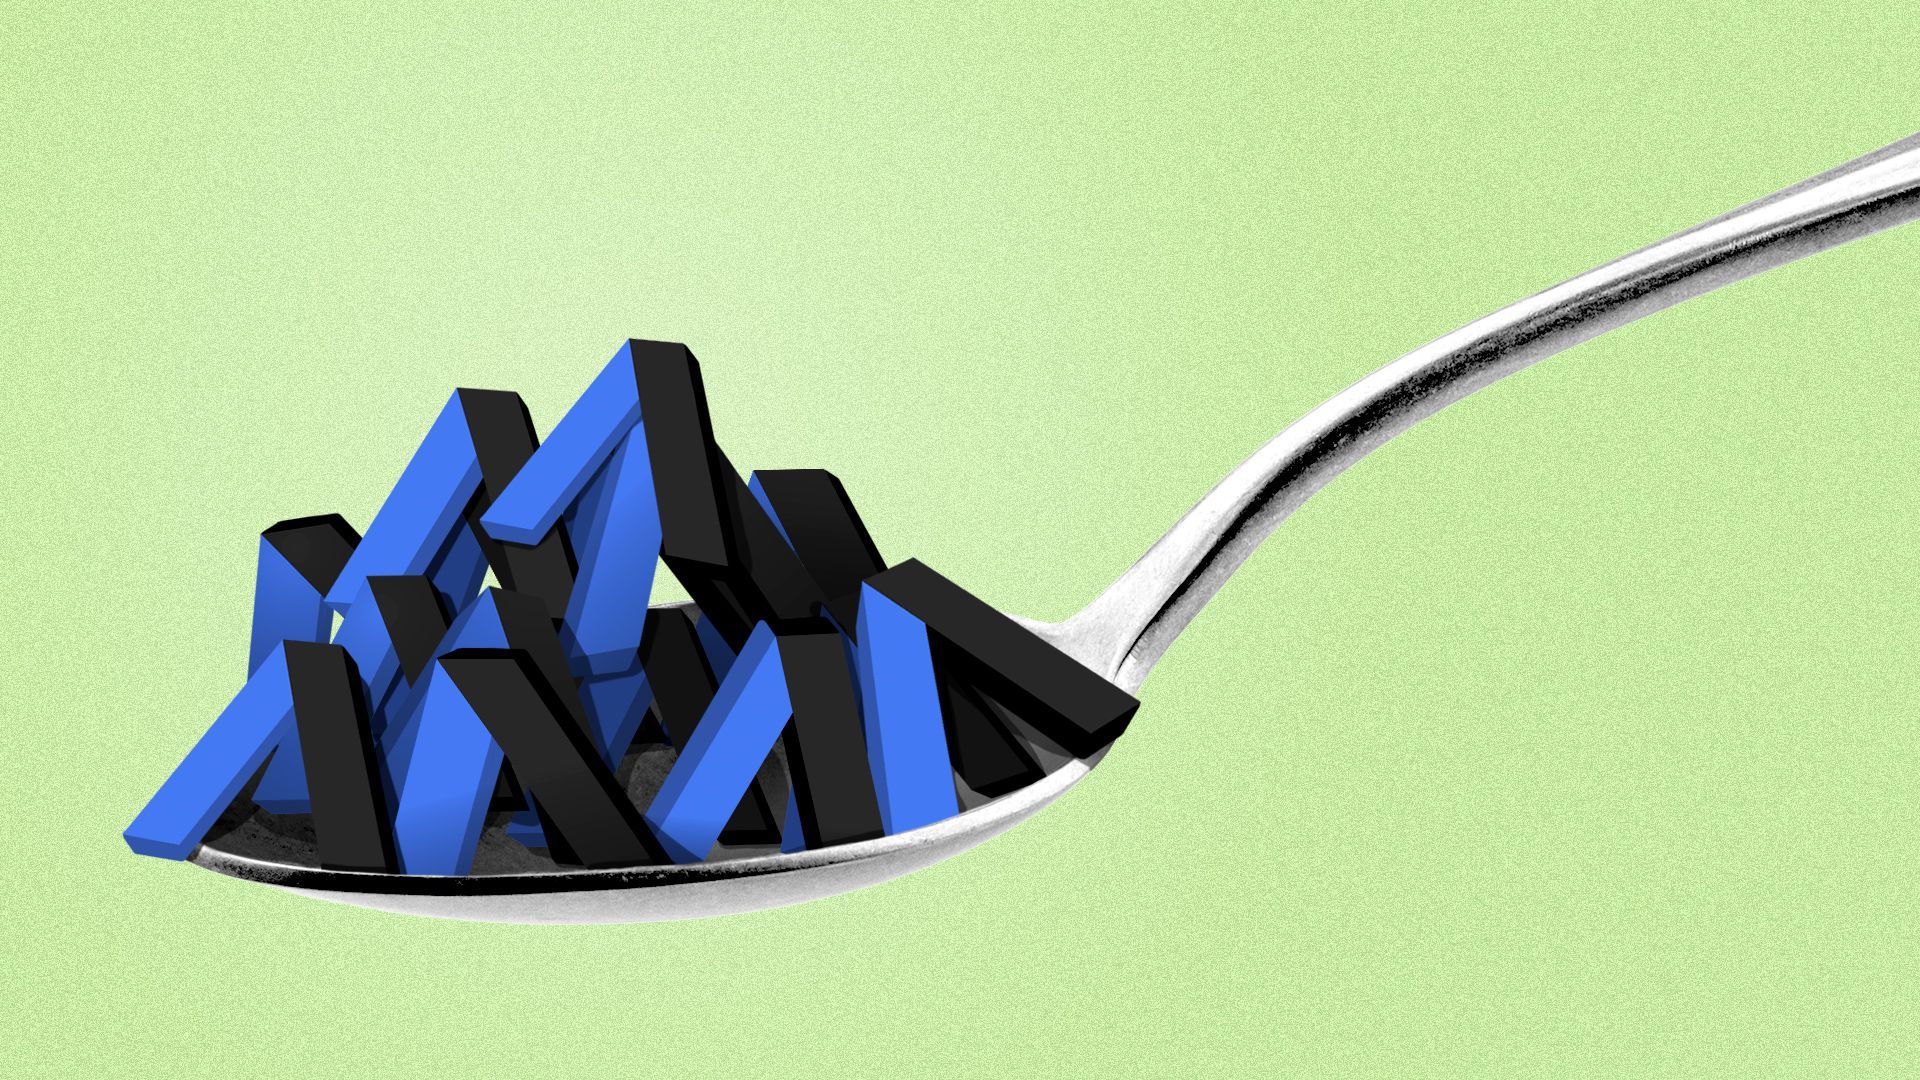 Illustration of a spoonful of Axios logos.